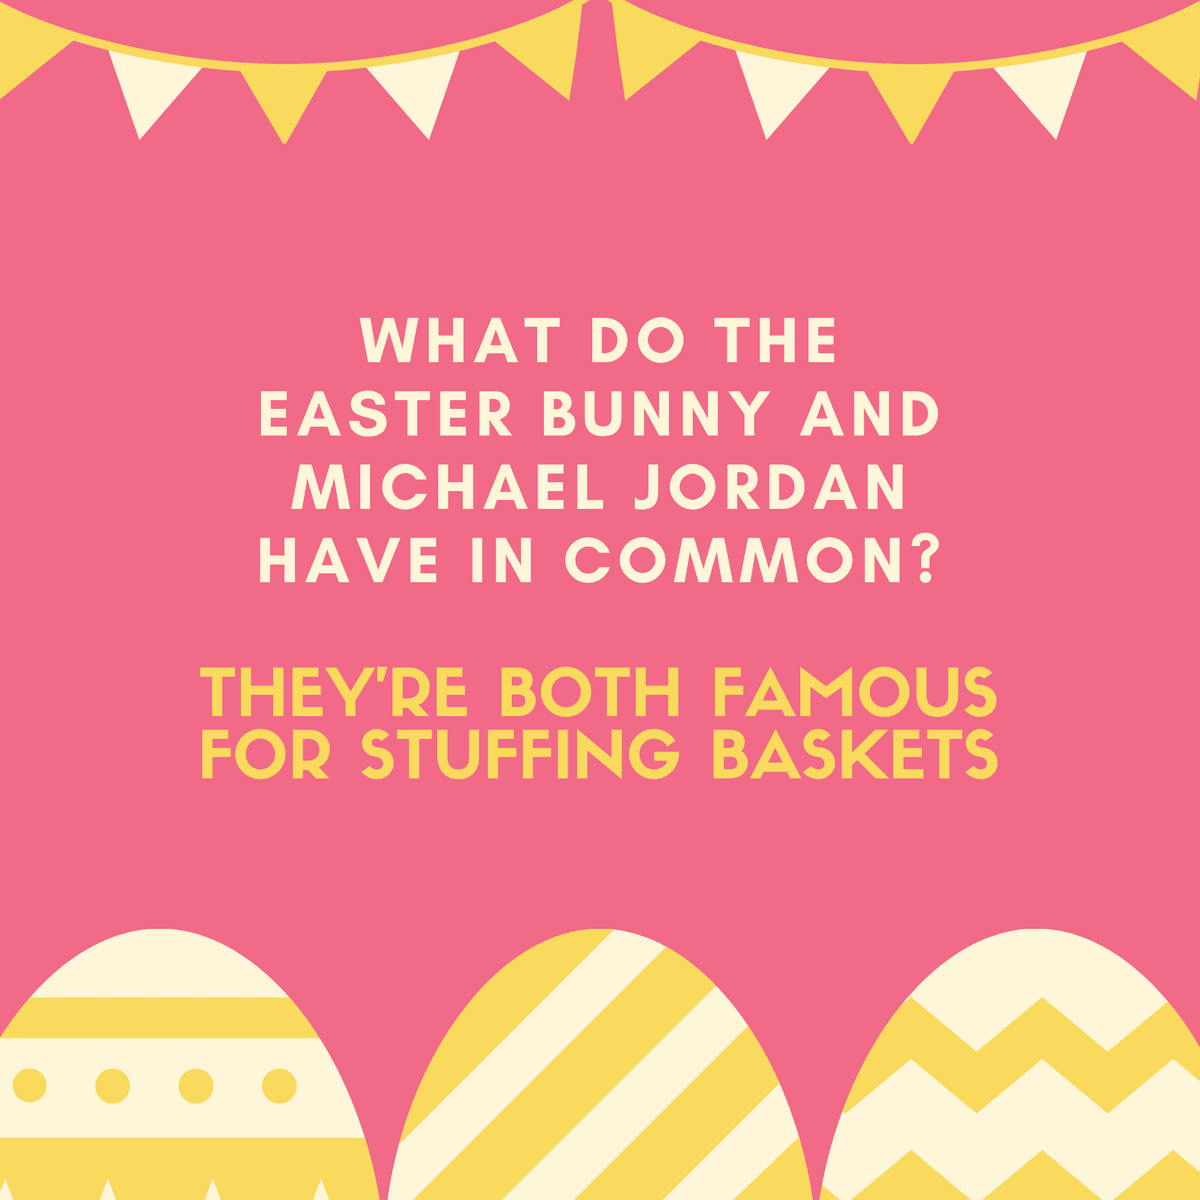 What do the Easter Bunny and Michael Jordan have in common?